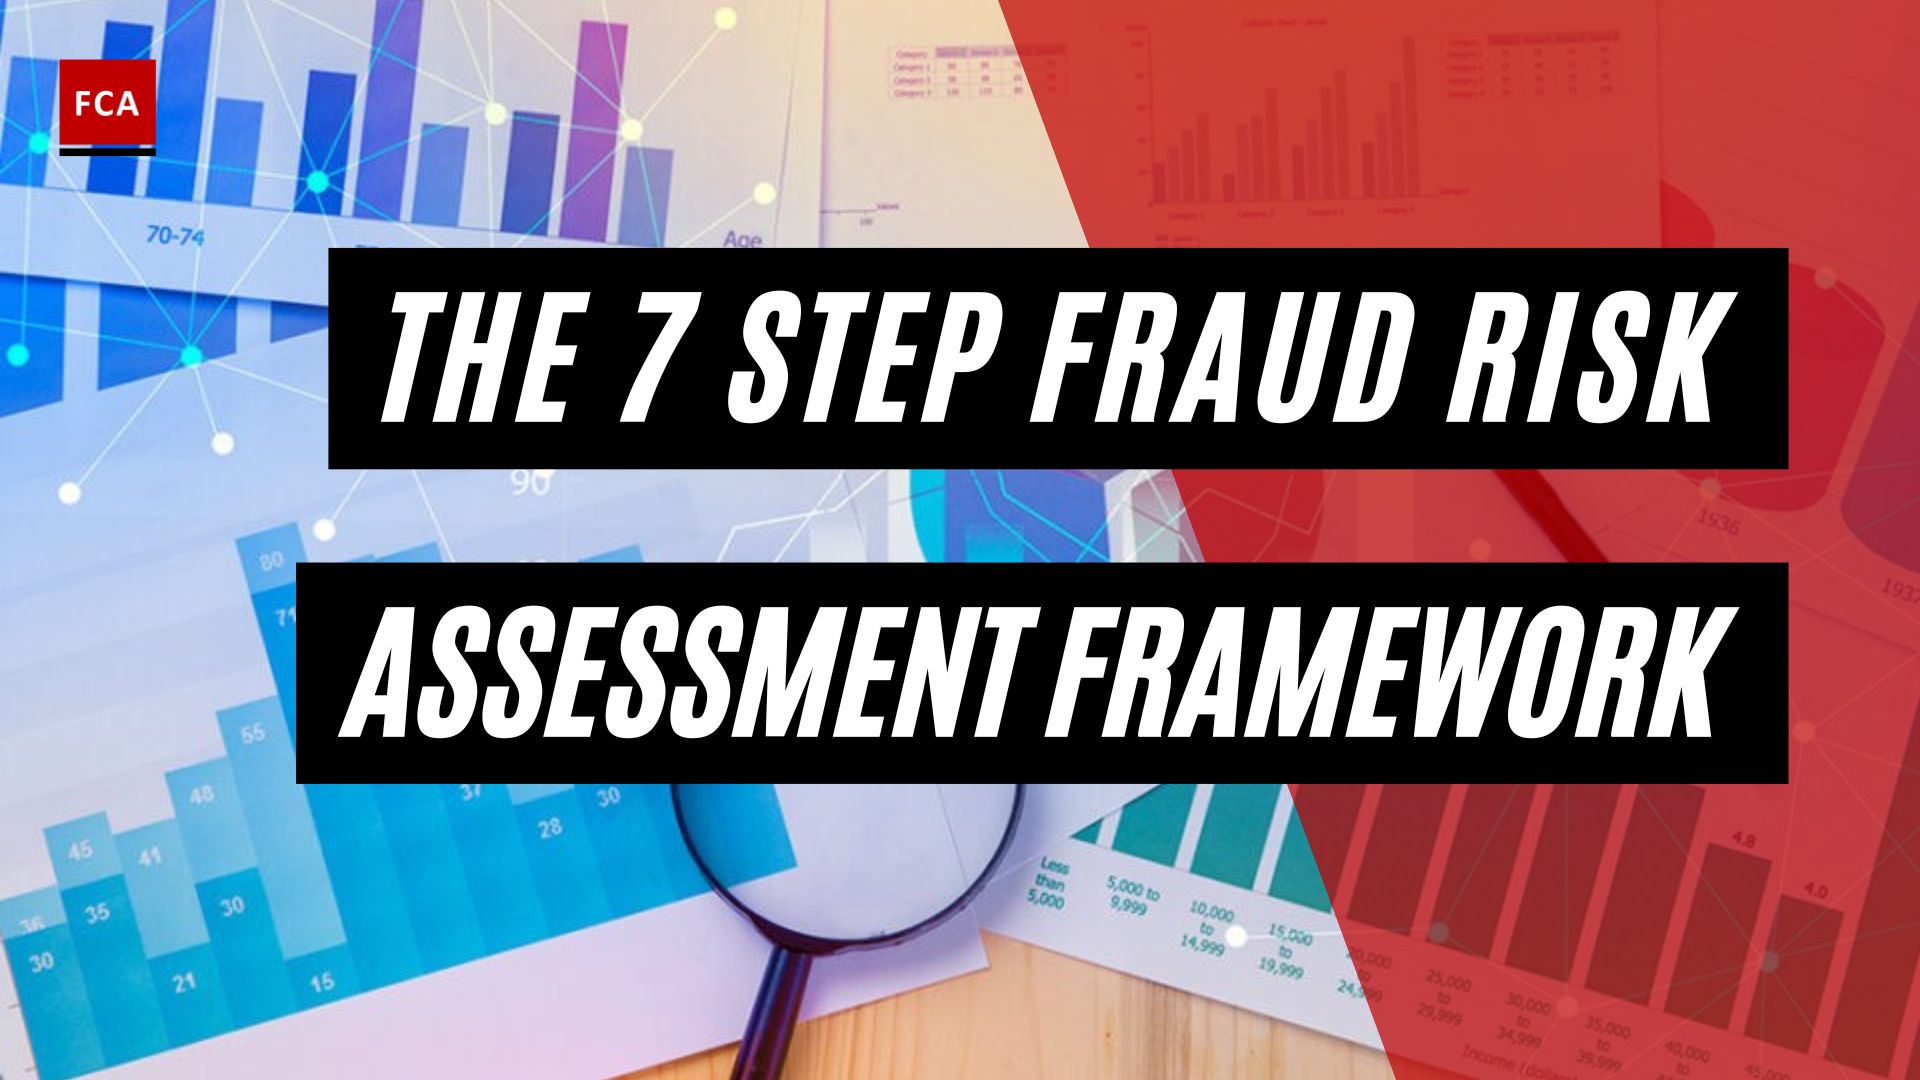 The 7 Step Fraud Risk